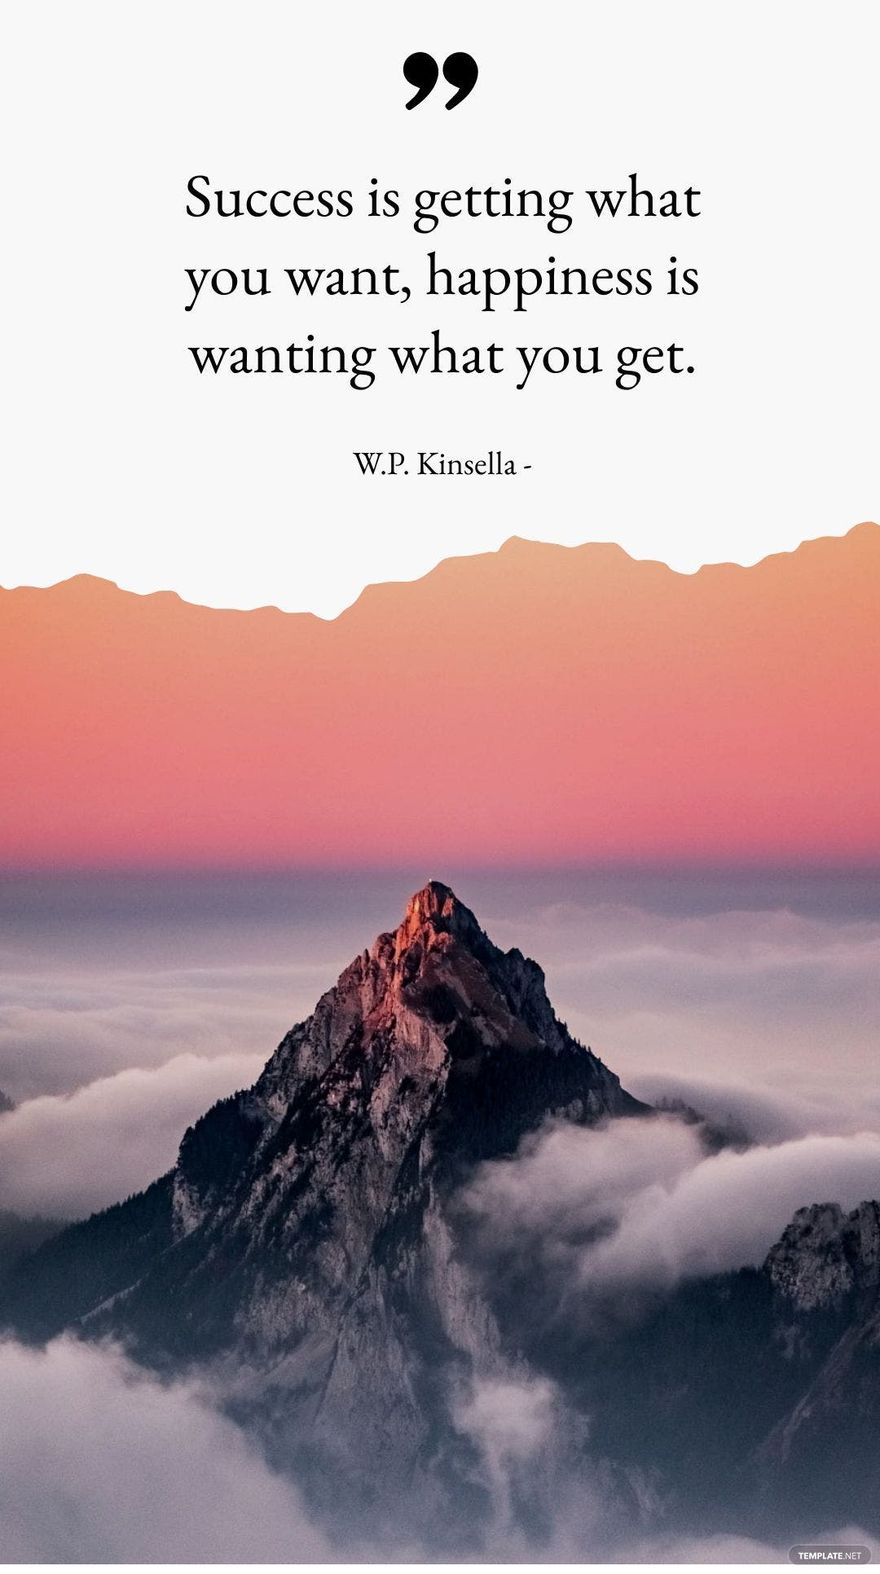 W.P. Kinsella - Success is getting what you want, happiness is wanting what you get.